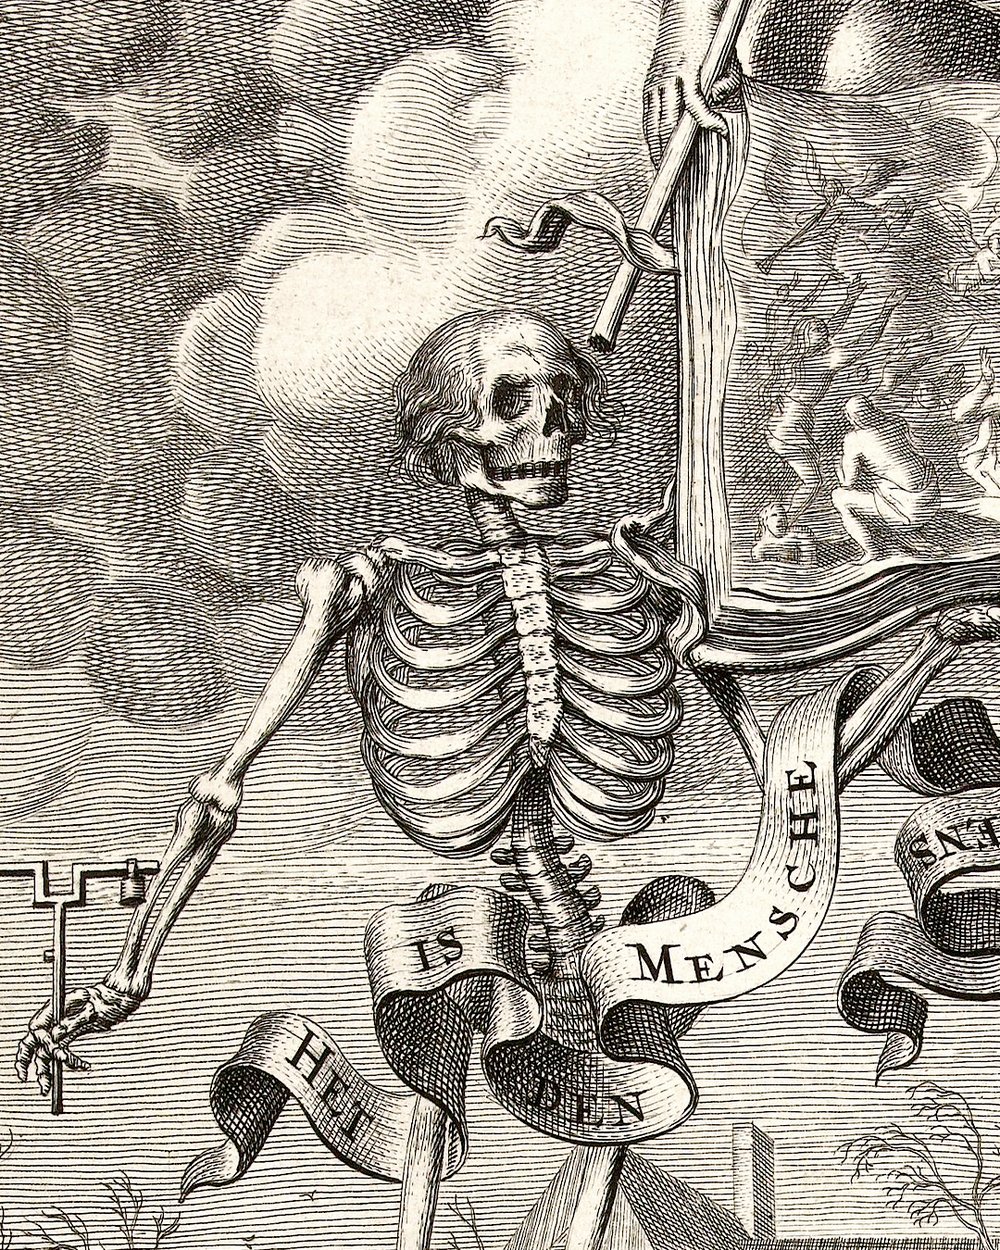 "Two skeletons and an Angel with an open book at the Last Judgment" (1655)